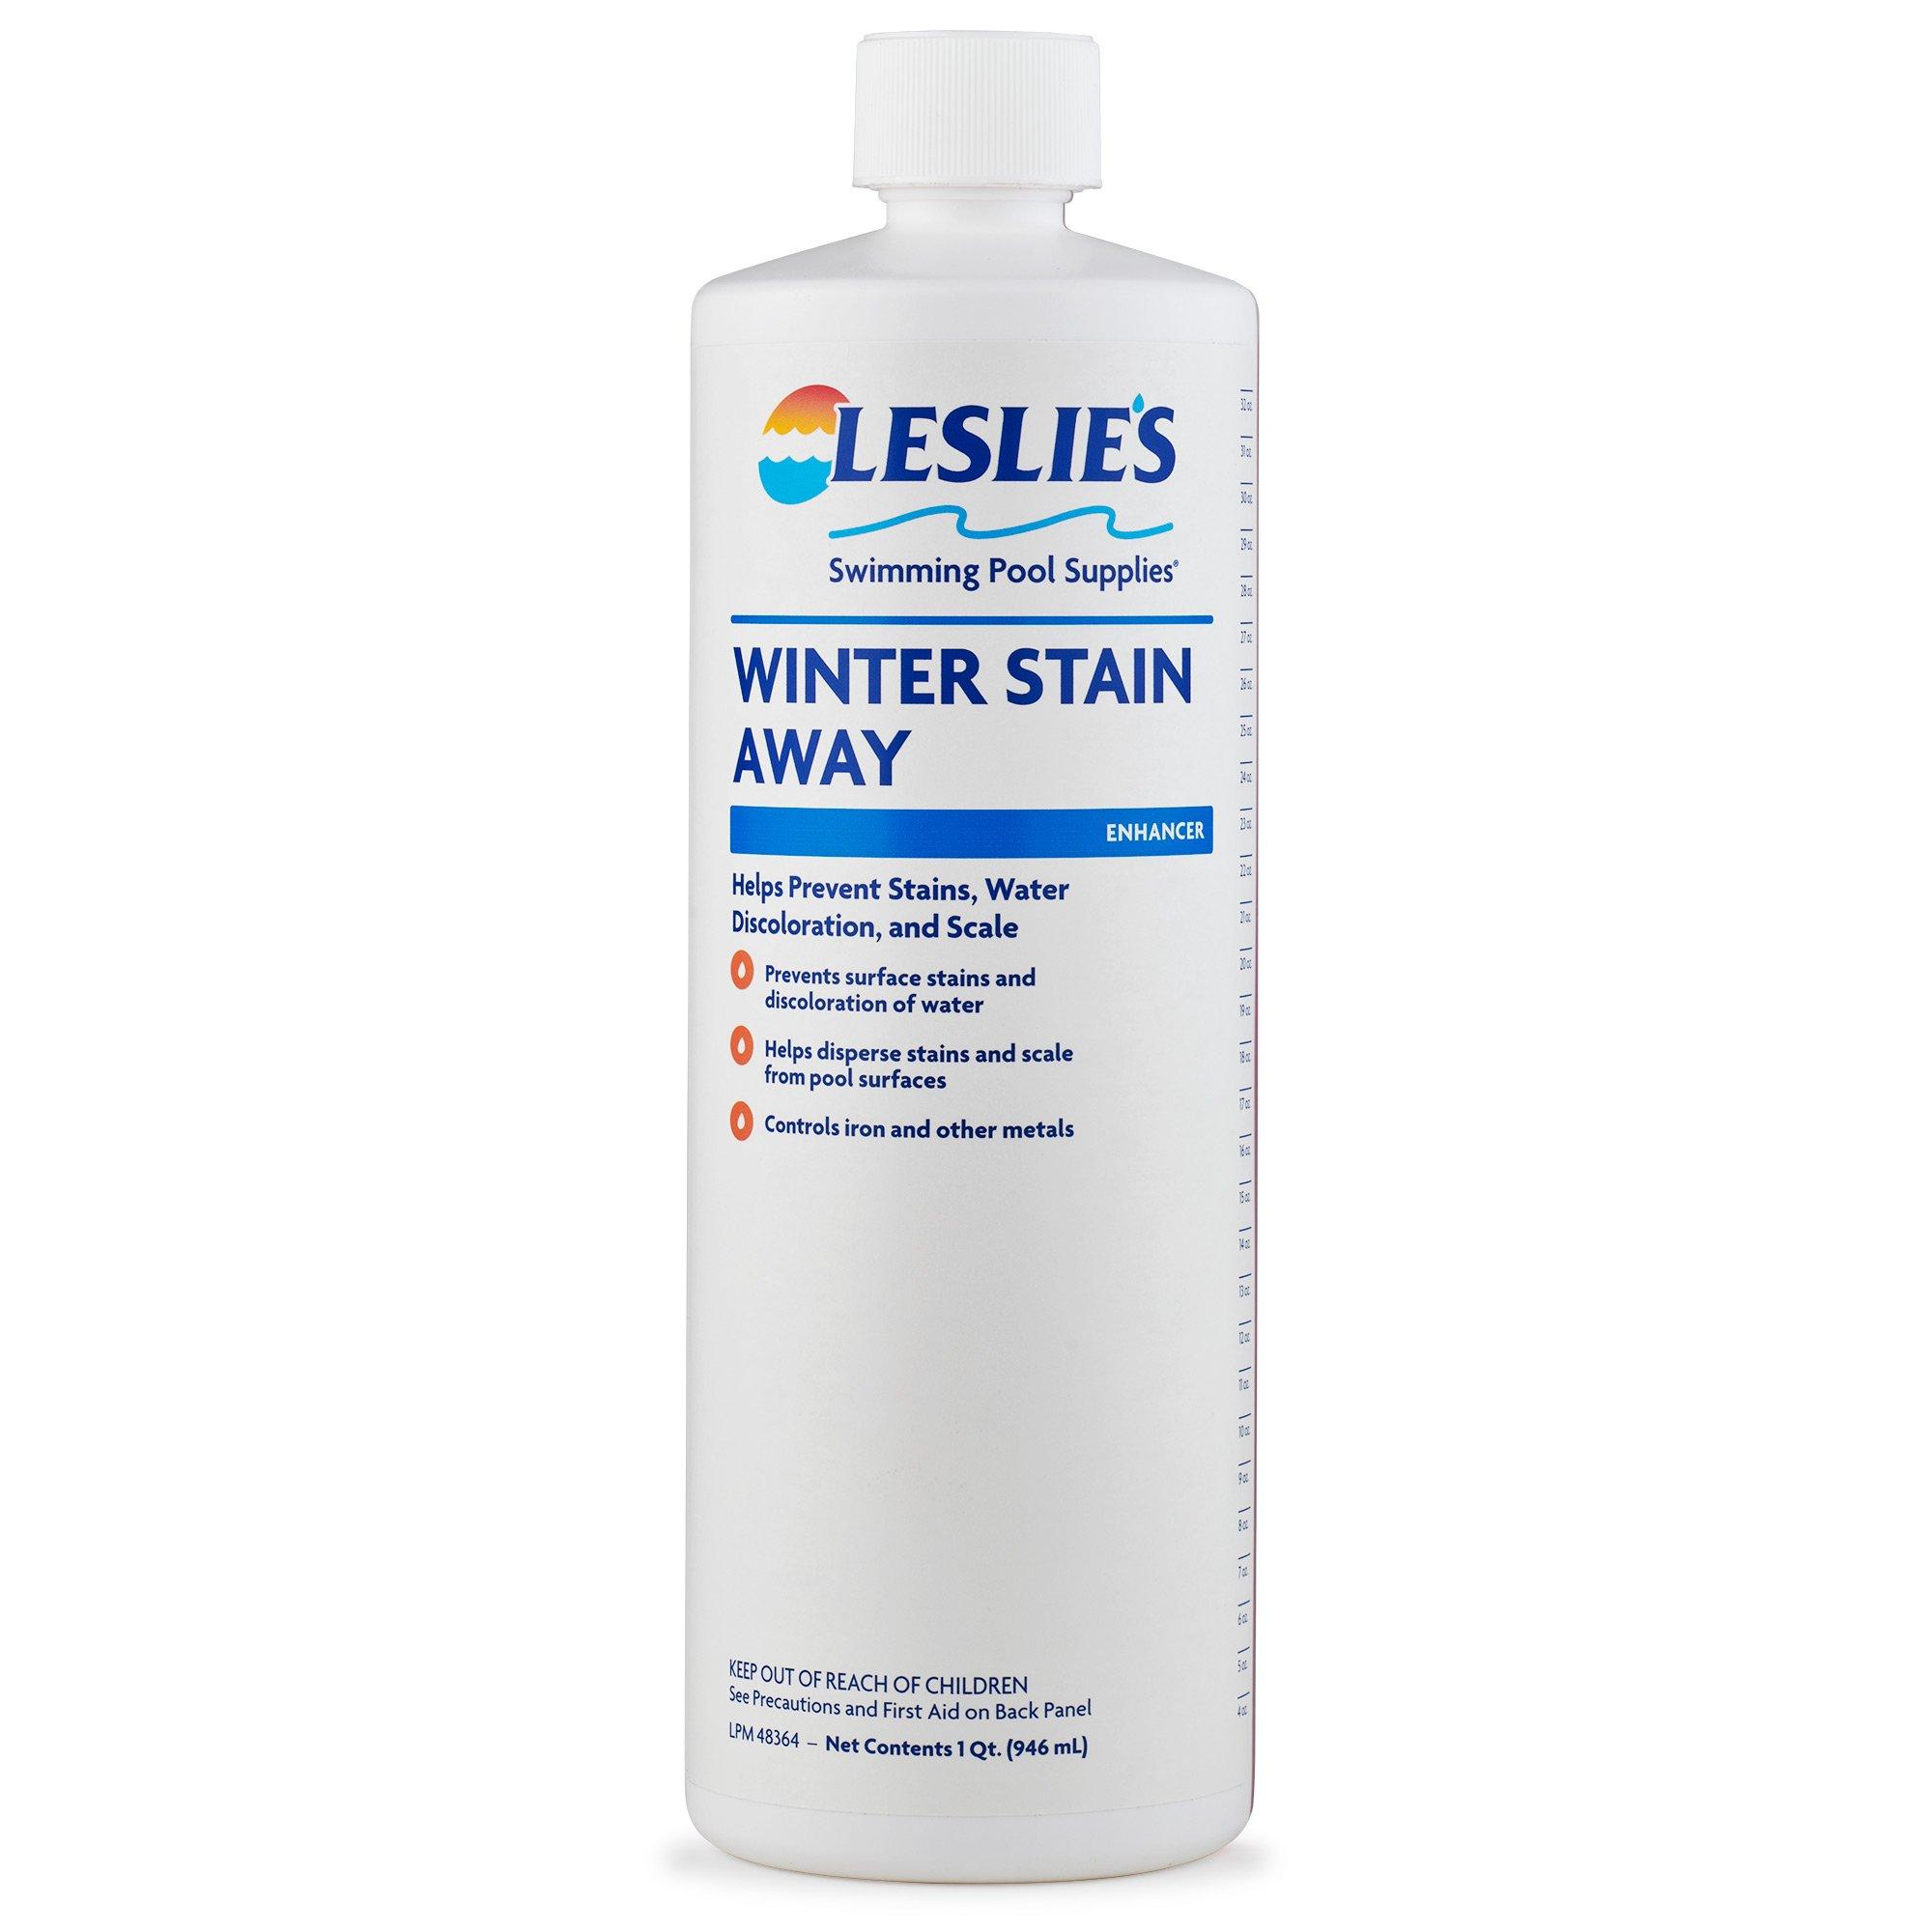 Leslie's  Winter Pool Closing Kit up to 15,000 Gallons